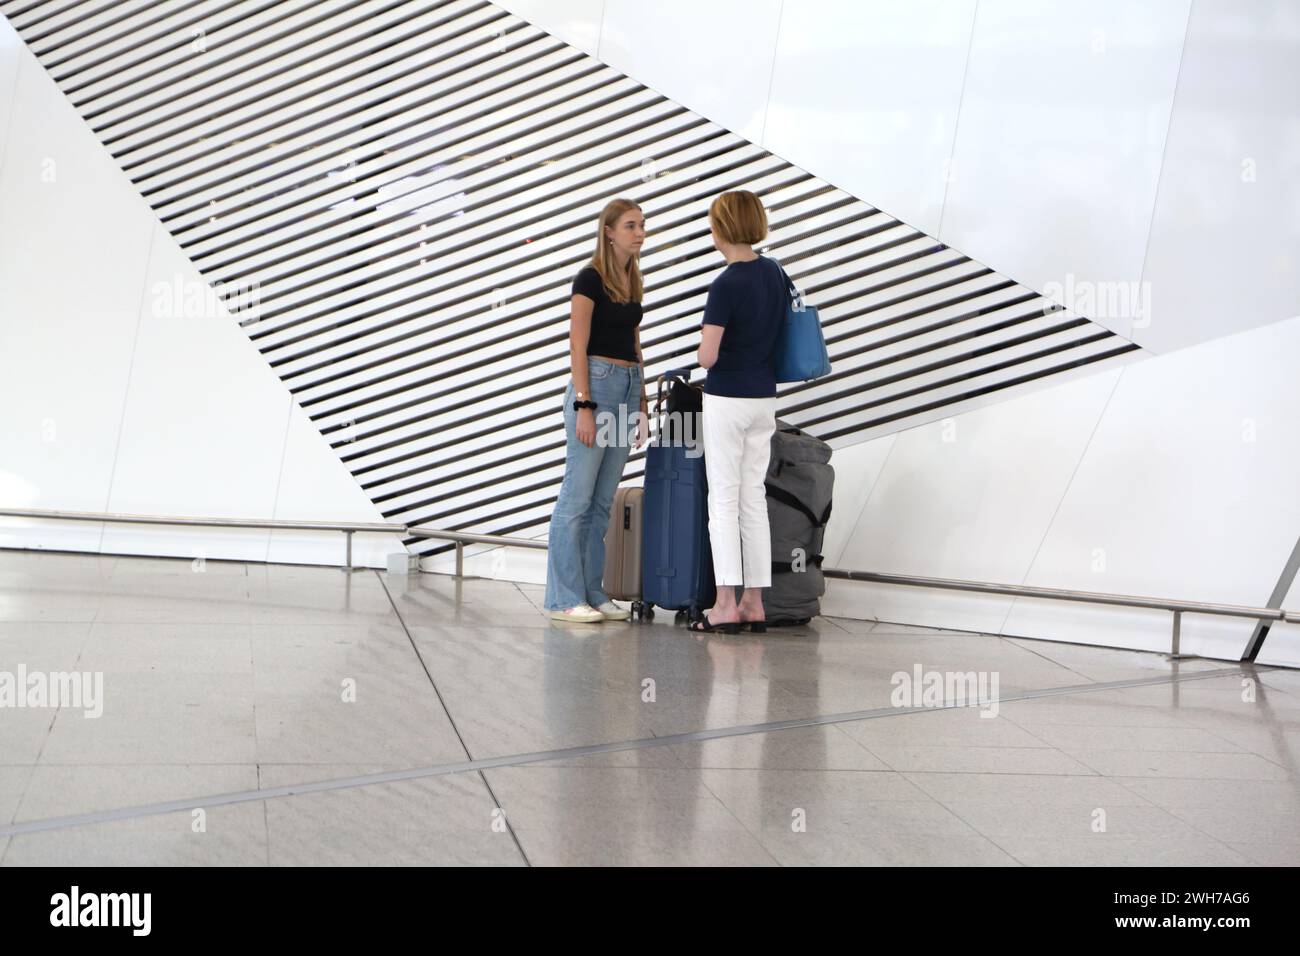 Athens Greece Athens International Airport (AIA) Eleftherios Venizelos Women With Suitcases Standing next to Artistic Vents in the Wall Stock Photo